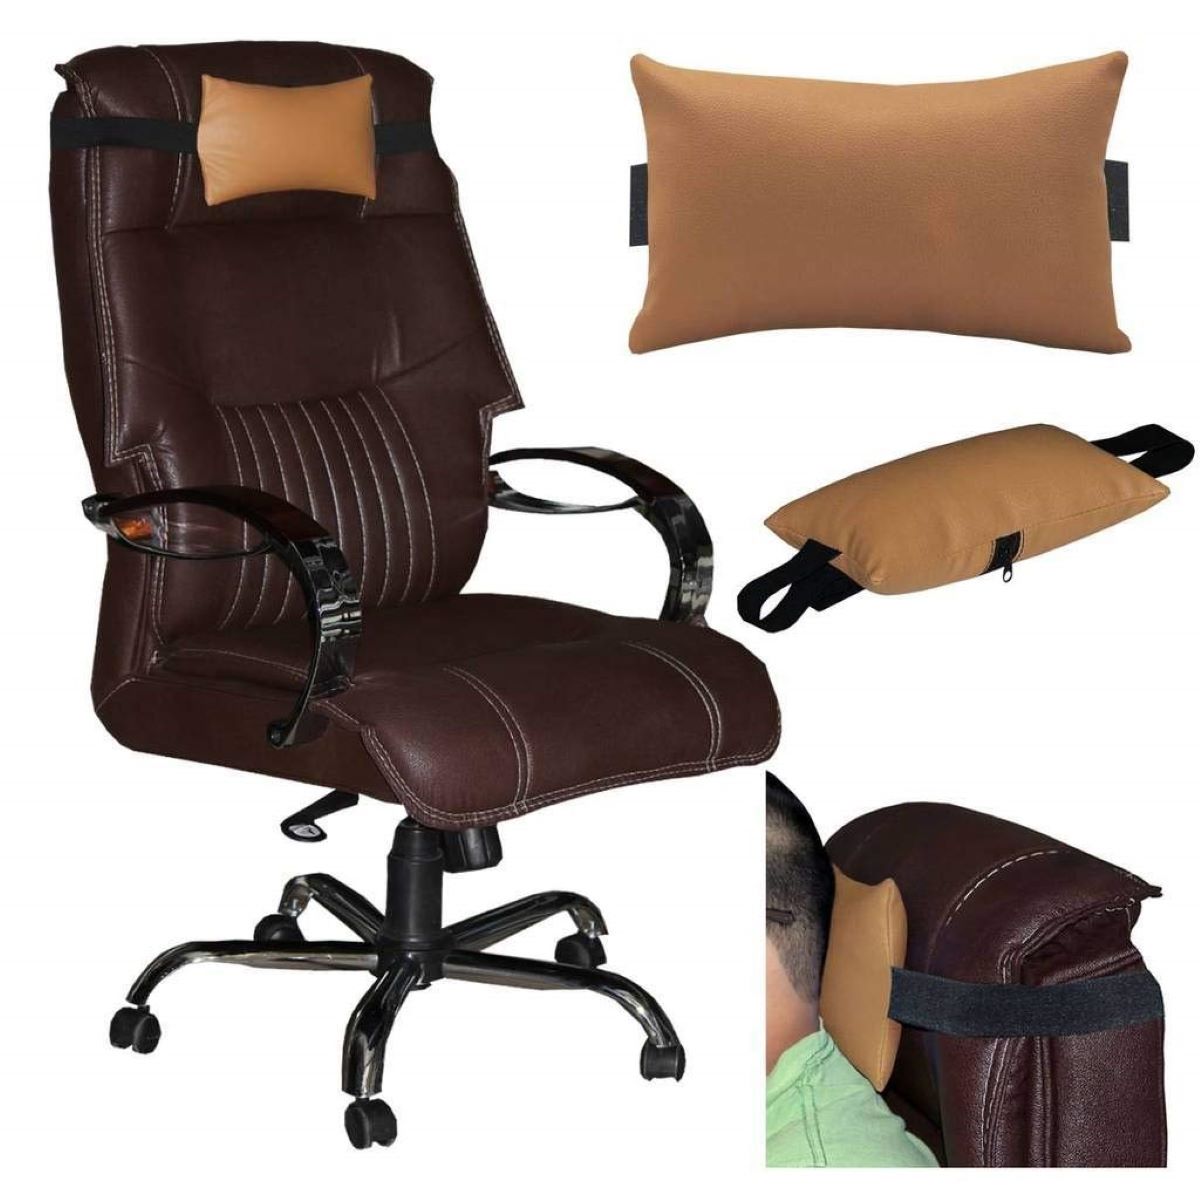 SAMSONITE Lumbar Support Pillow For Office Chair and Indonesia